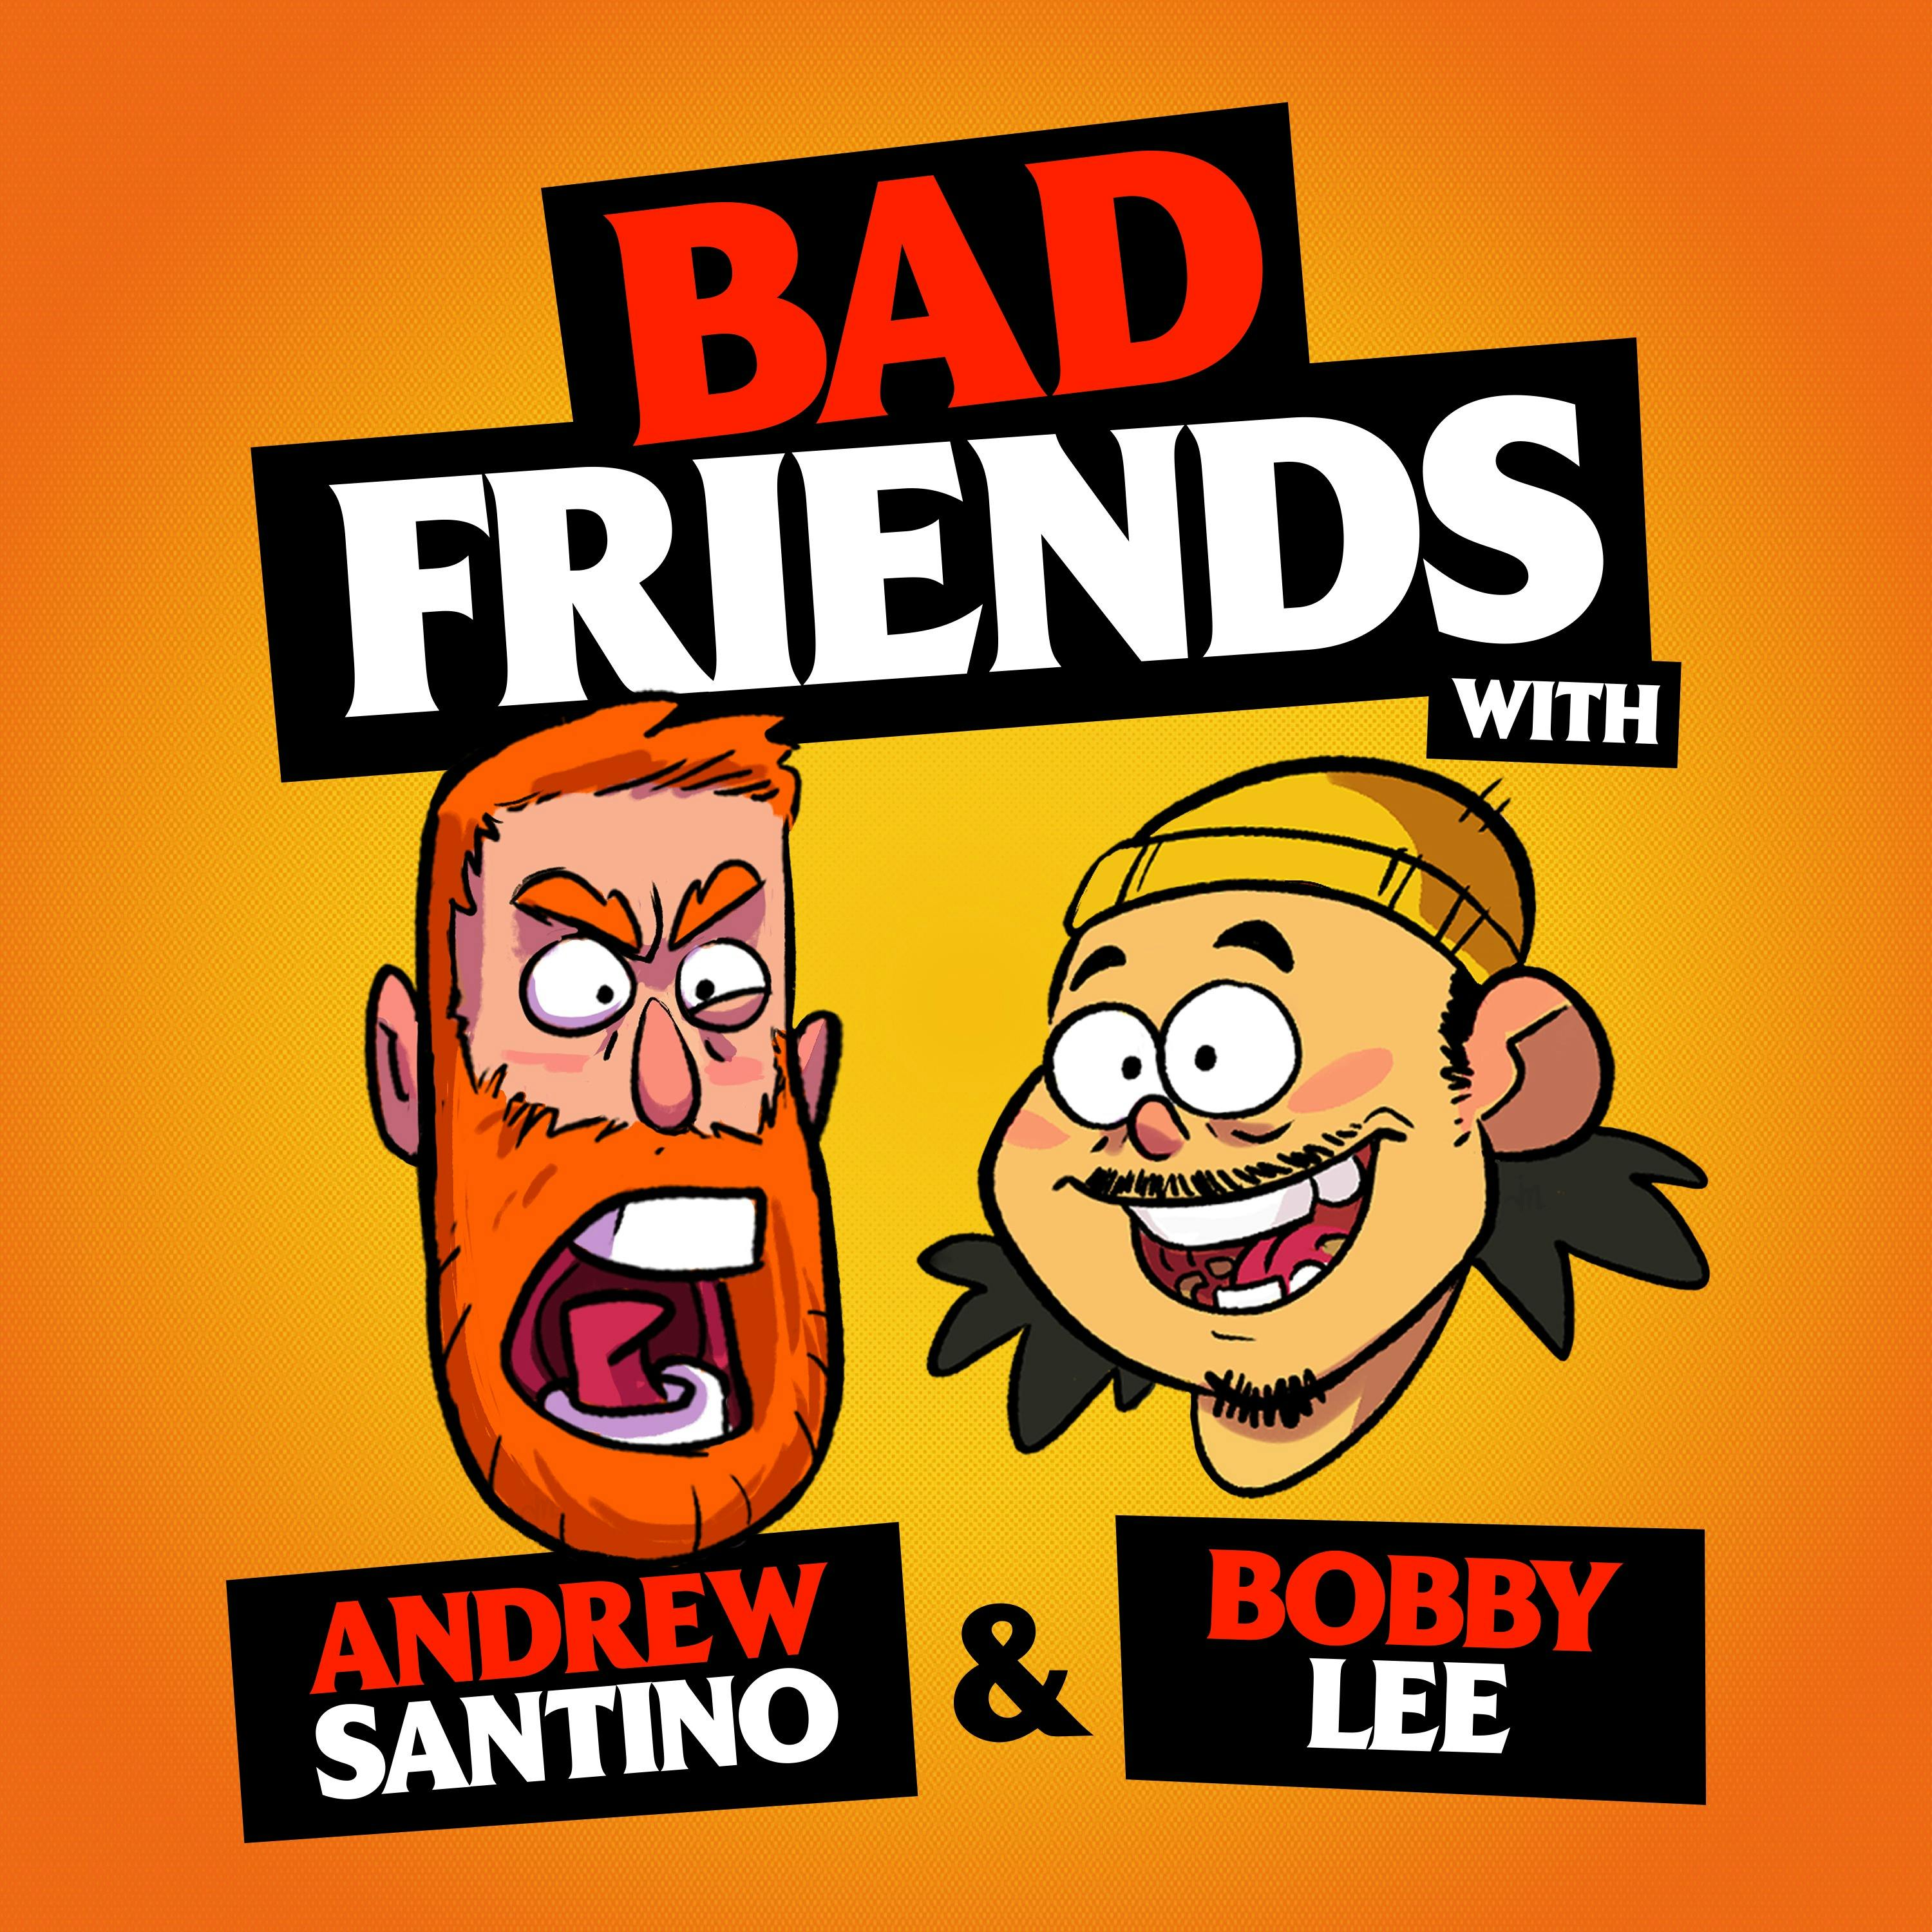 Medieval Farts and Reverse Sneezing by Andrew Santino and Bobby Lee